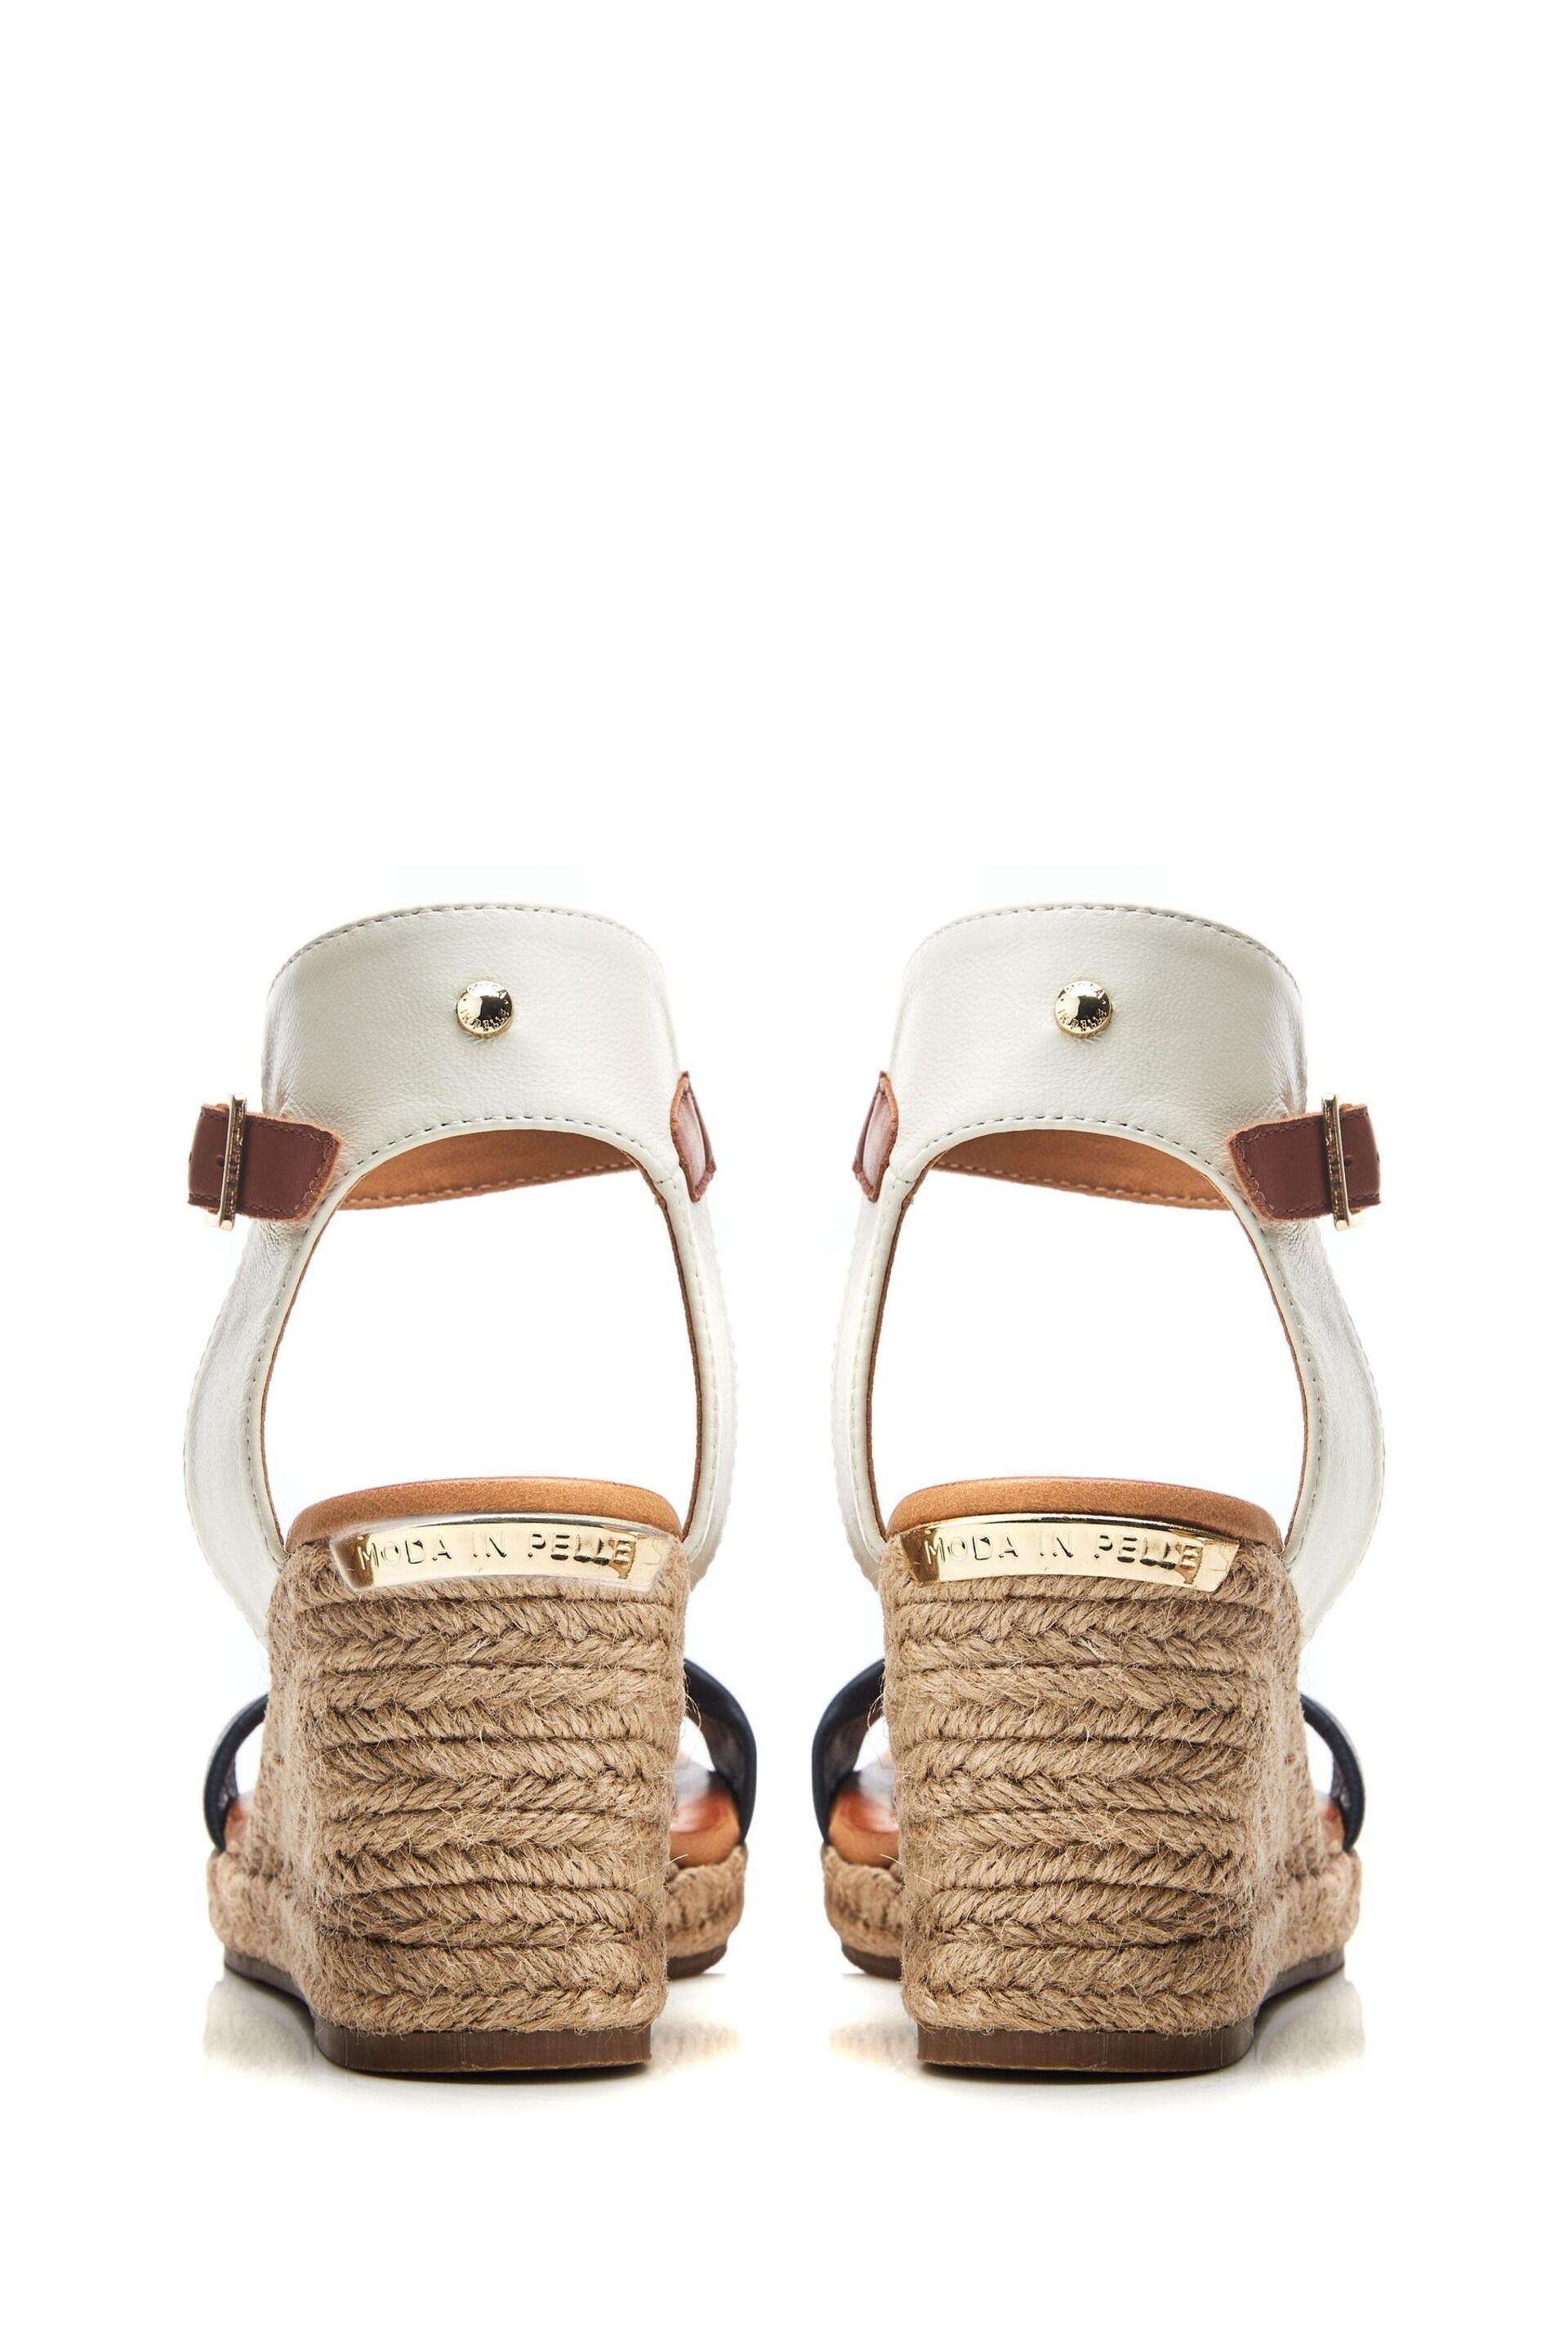 Moda in Pelle Phyllis Square Toe Two Strap Wedge Sandals - Image 3 of 4